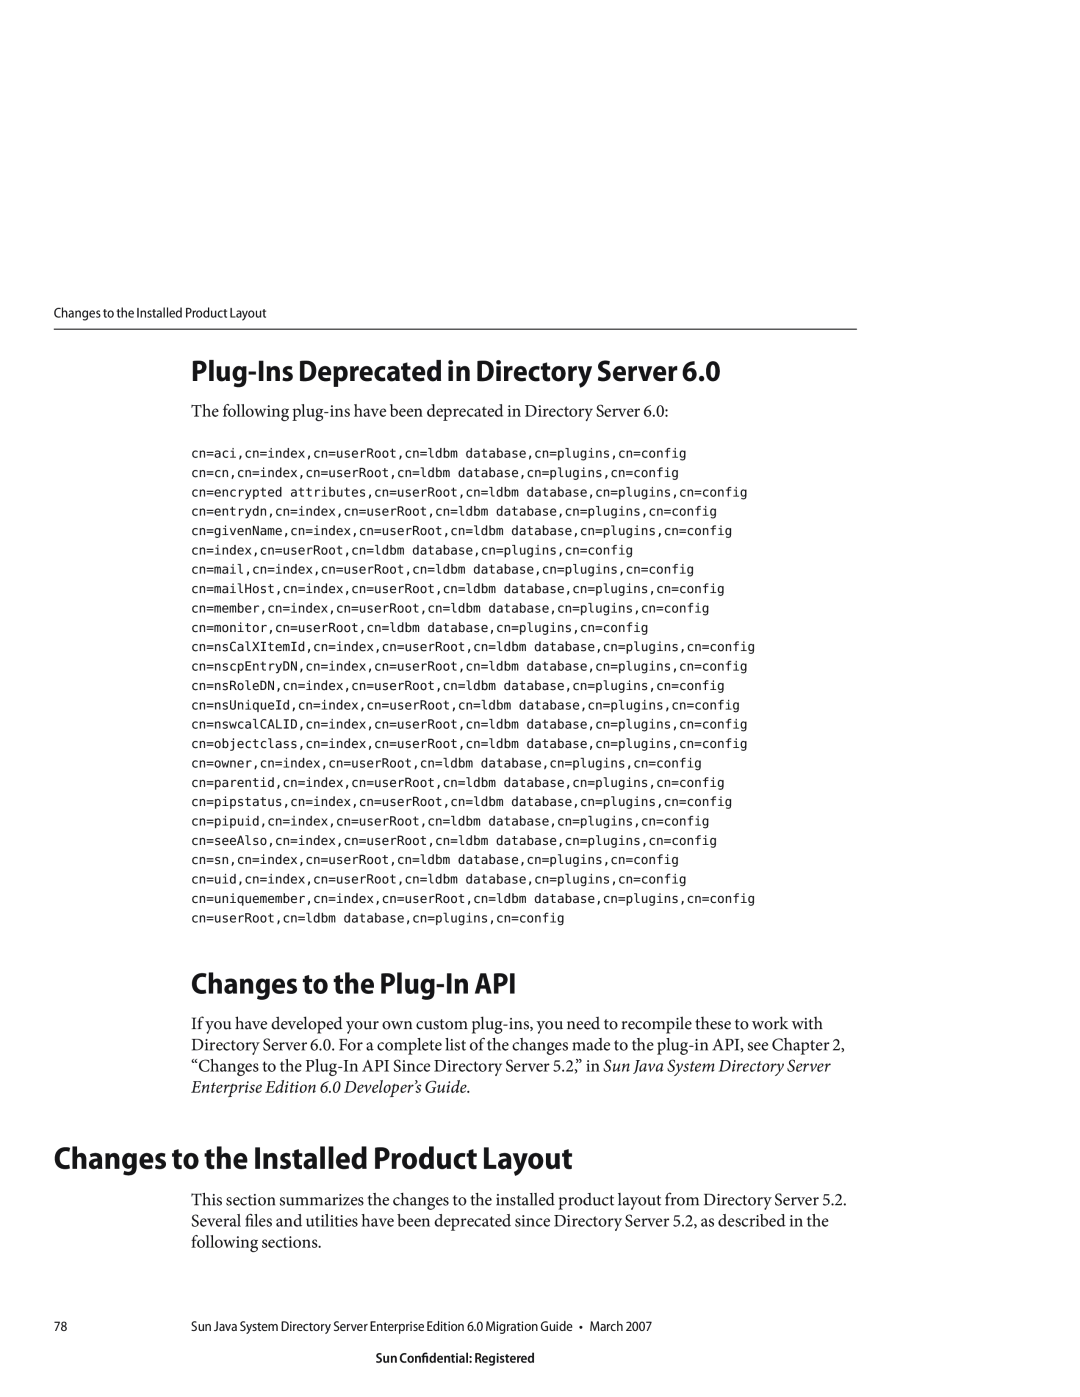 Sun Microsystems 8190994 manual Changes to the Installed Product Layout, Plug-Ins Deprecated in Directory Server 